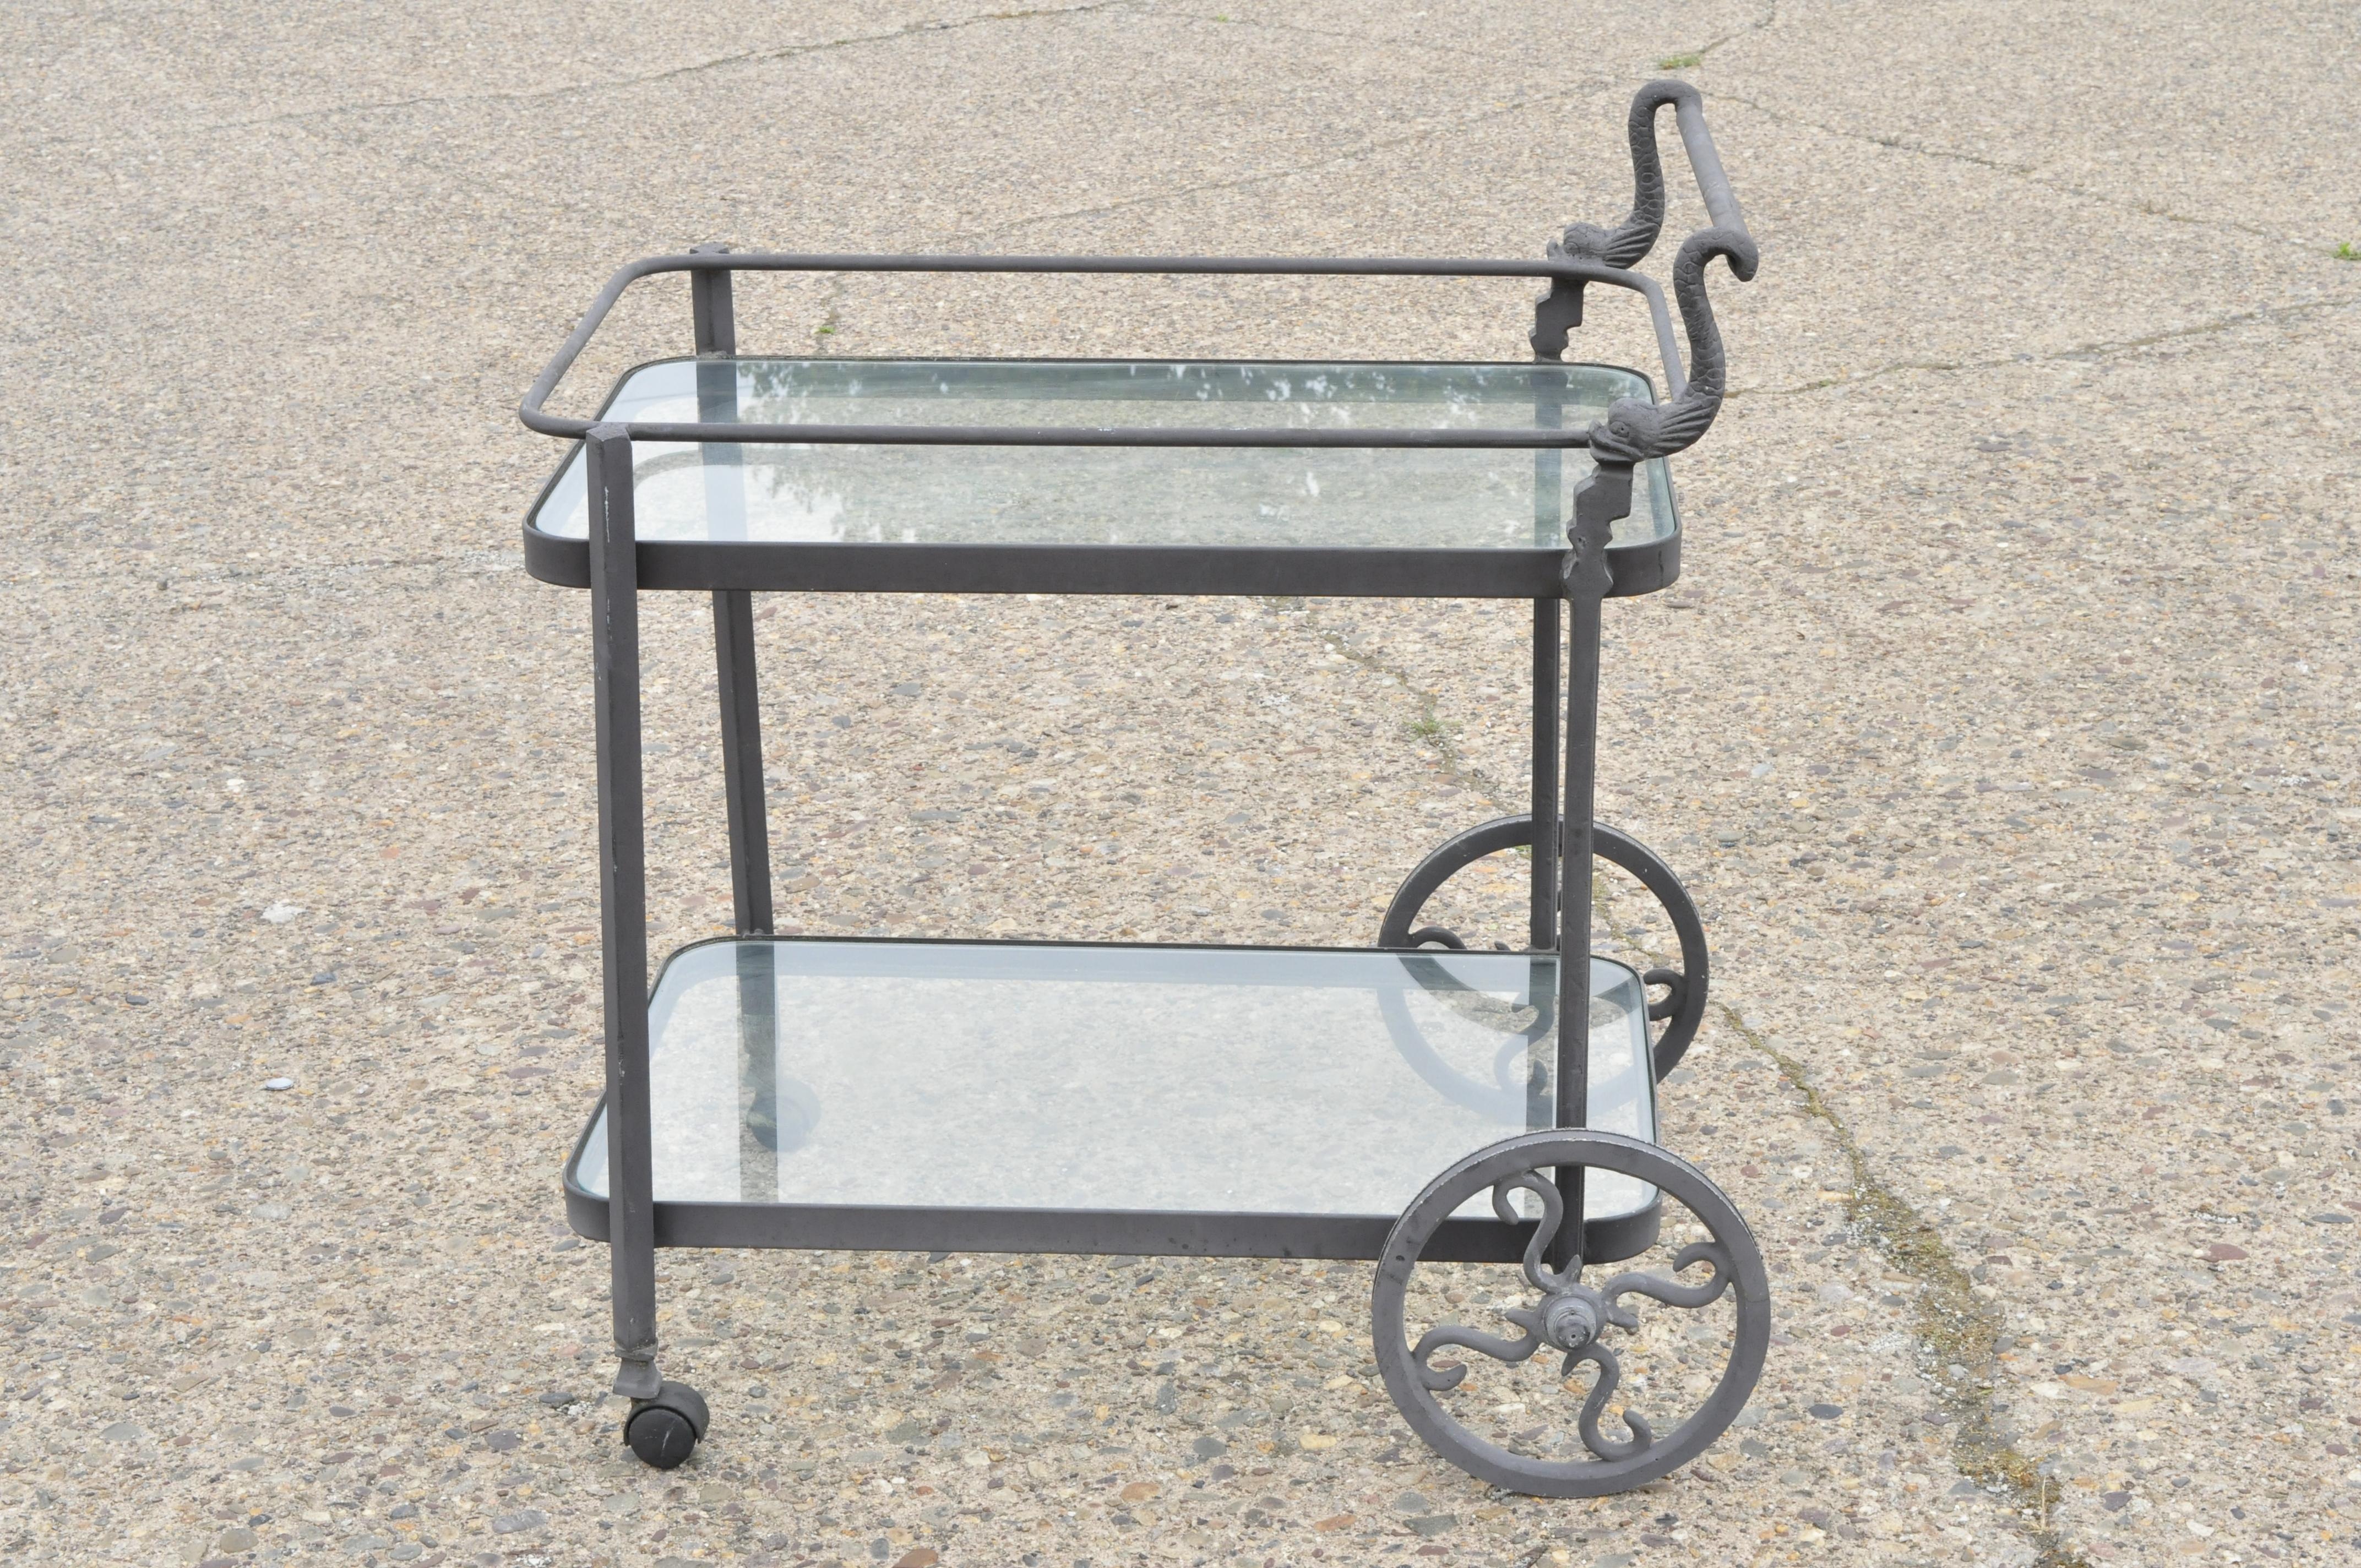 Cast aluminum 2-tier rolling bar cart server with fish dolphin handle. Item features 2 glass tiers, dolphin/fish handle, cast aluminum construction, great style and form, circa late 20th century. Measurements: 36.5